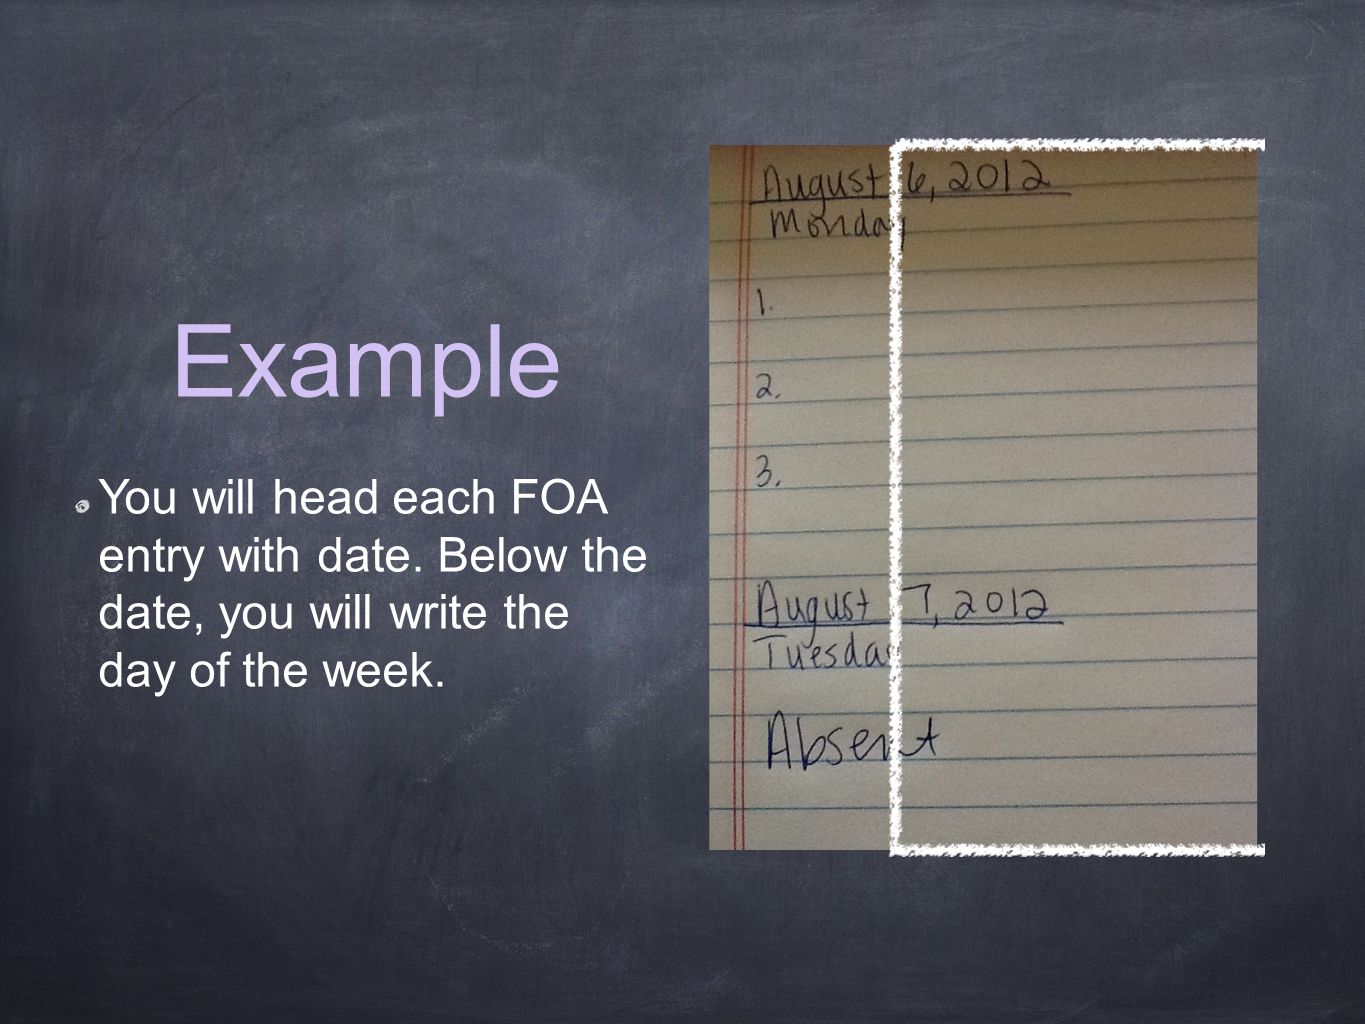 Example You will head each FOA entry with date. Below the date, you will write the day of the week.